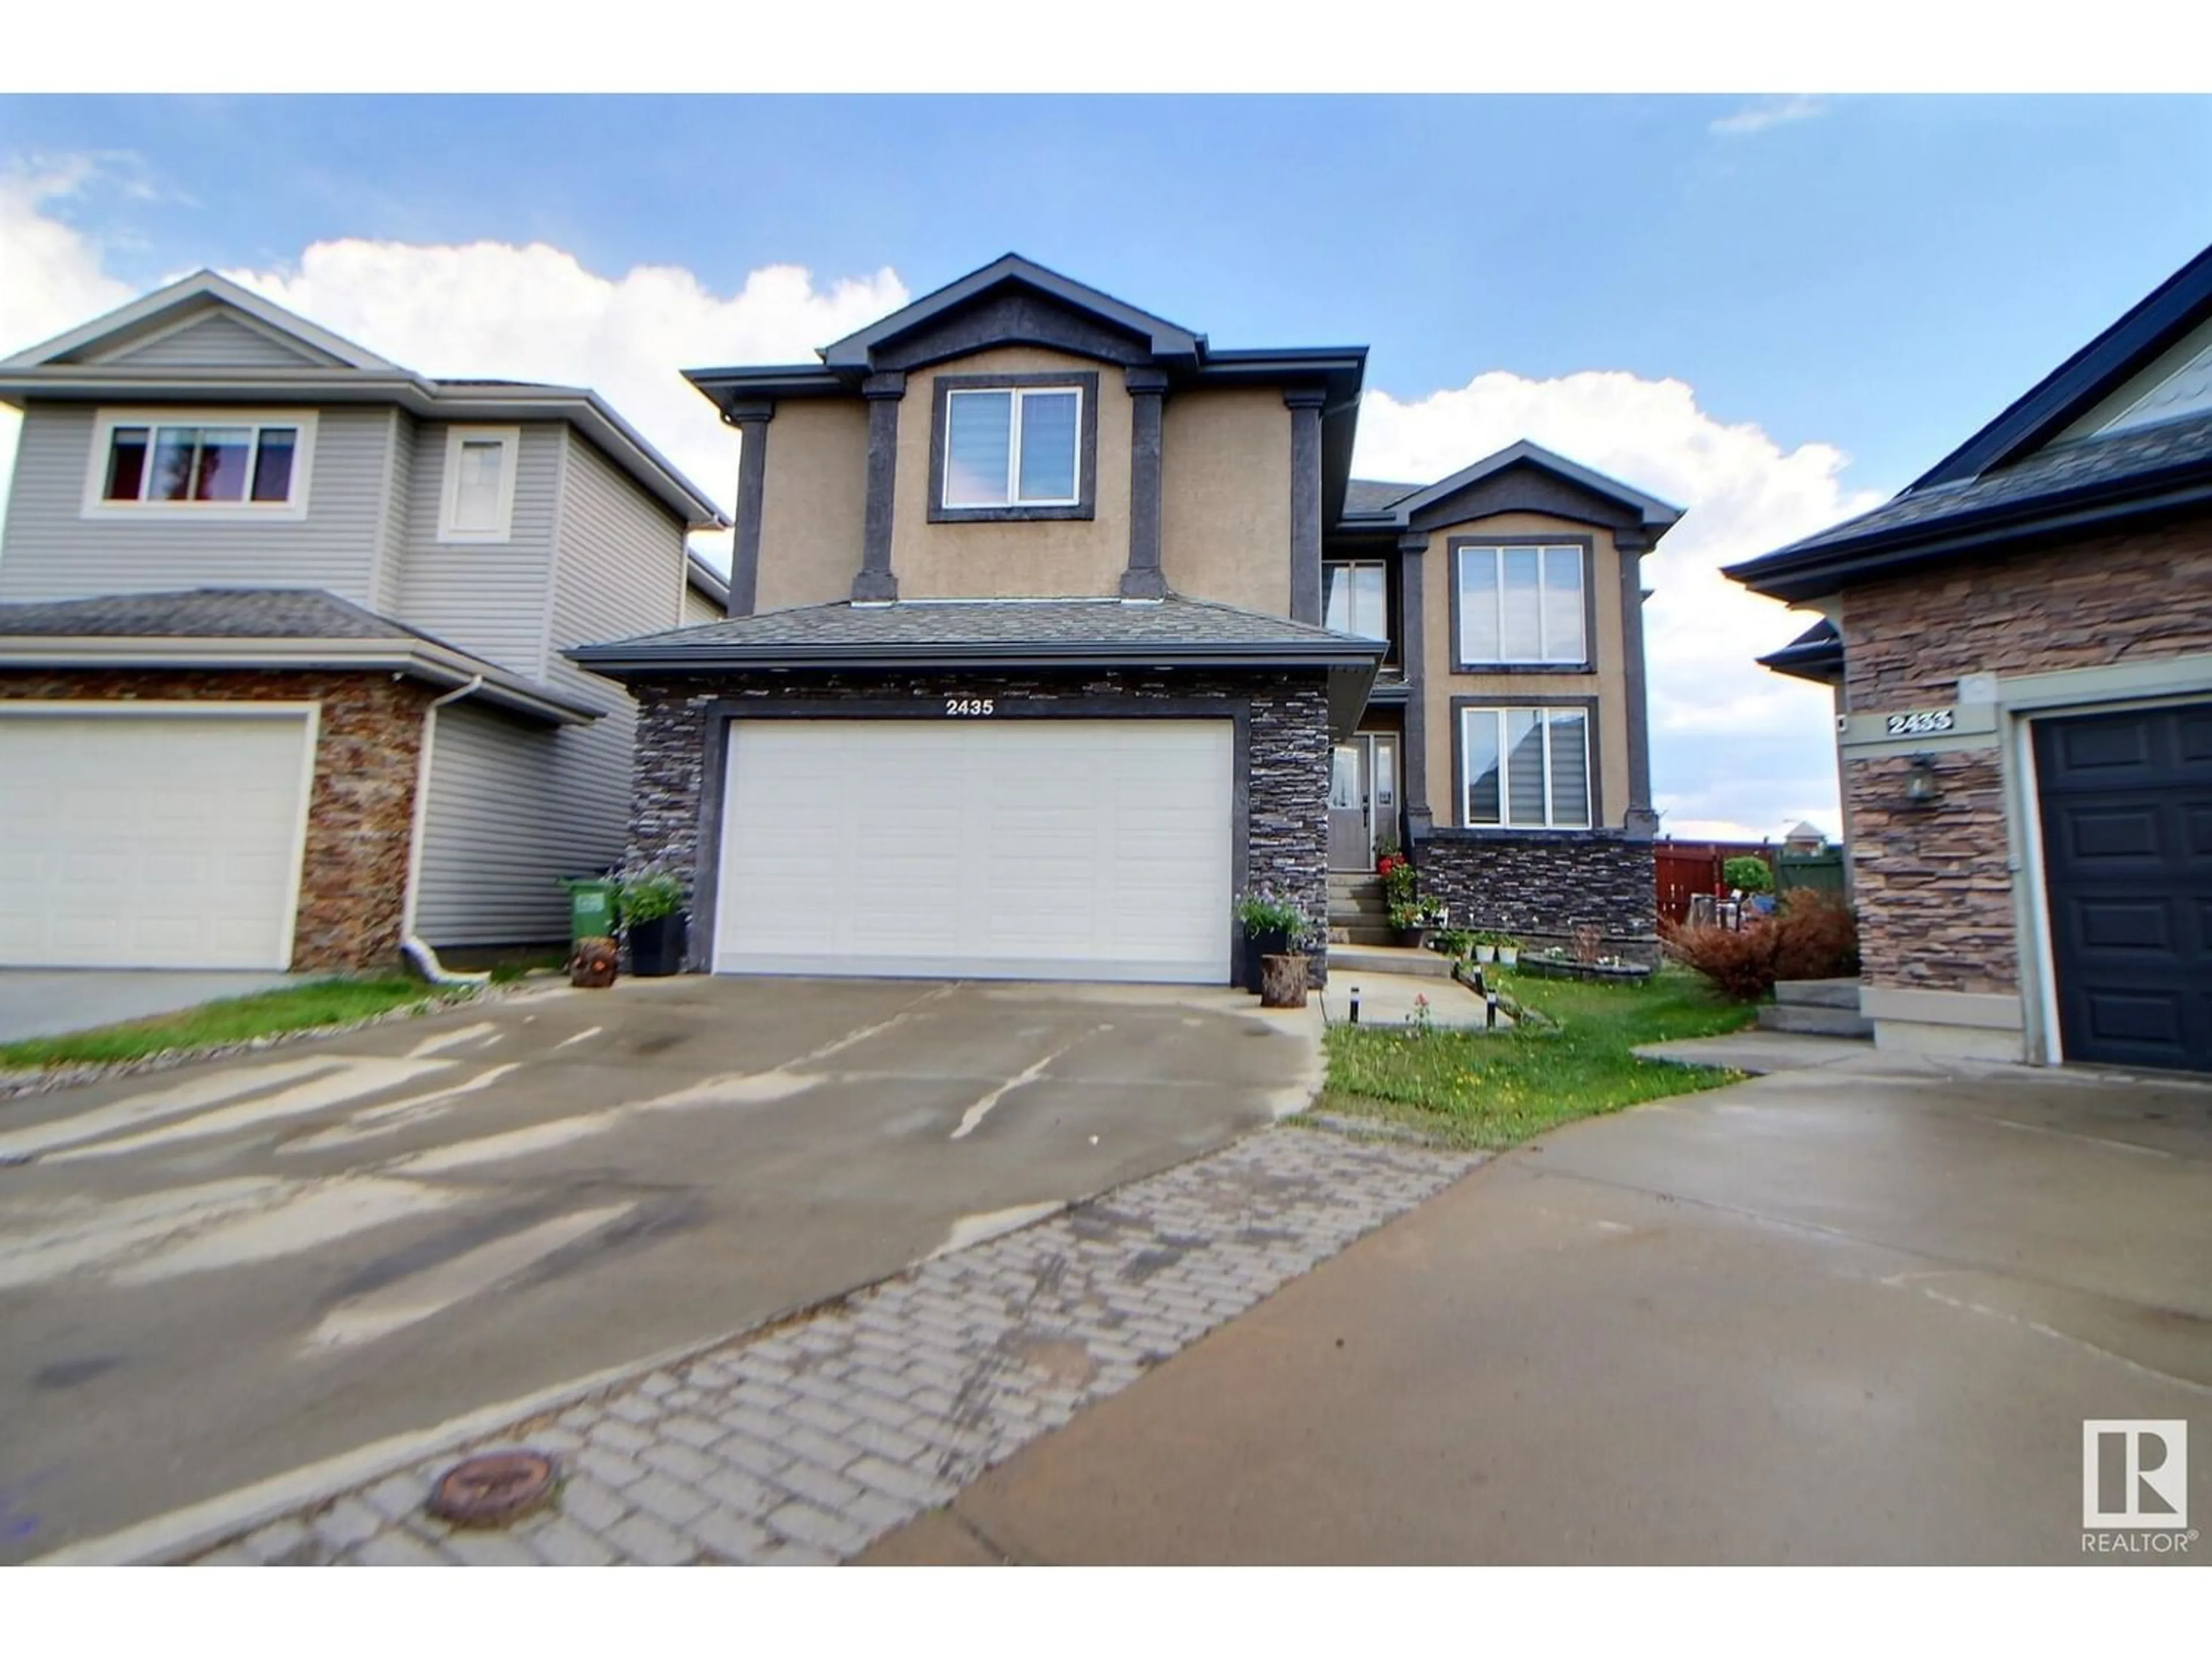 Frontside or backside of a home for 2435 HAGEN WY NW, Edmonton Alberta T6R3L5